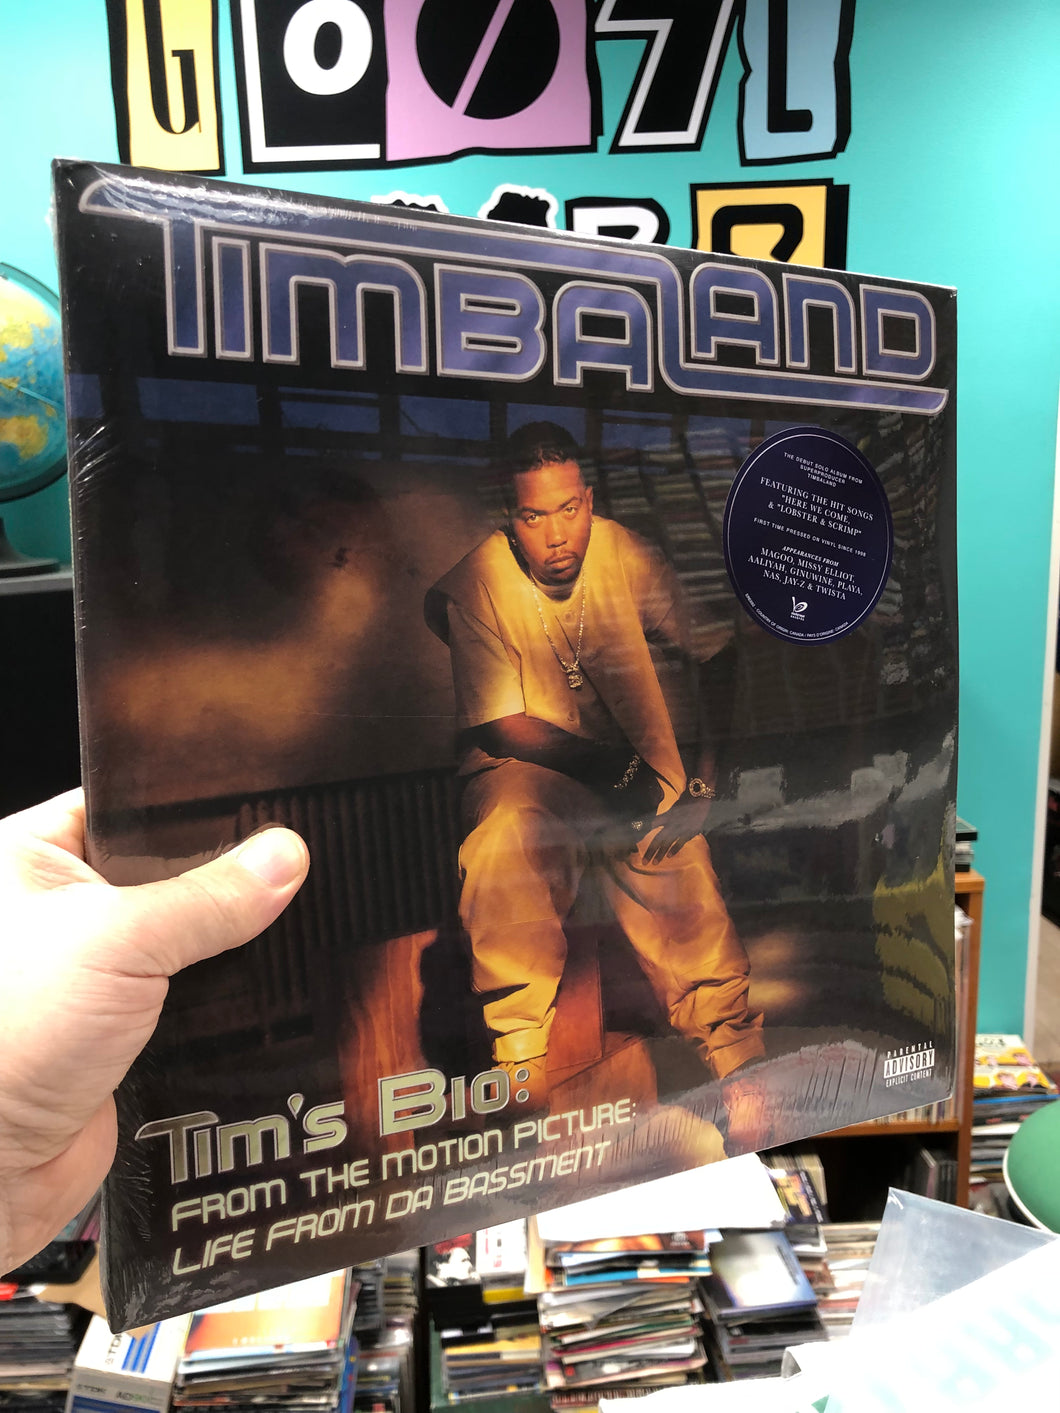 Timbaland-Tim’s Bio: From The Motion Picture: Life From Da Bassment, reissue, US 2022